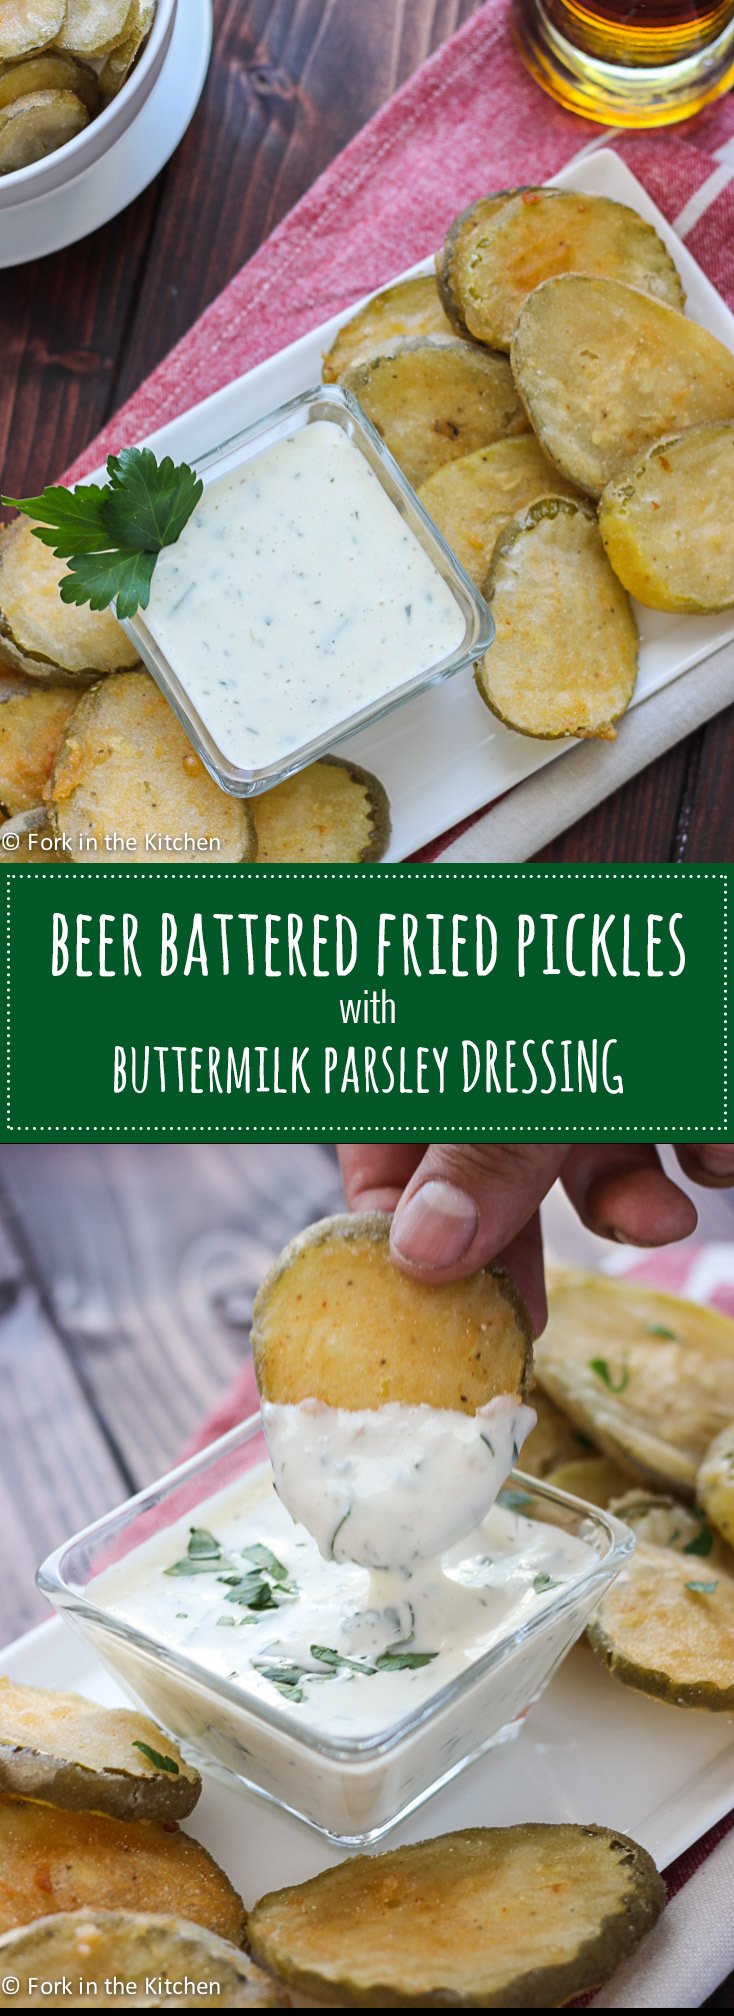 Beer Battered Fried Pickles - crunchy, salty, dill pickles dipped in a light, crisp beer batter coating and fried to perfection. Serve them with a buttermilk parsley dressing for a tasty snack! // Fork in the Kitchen